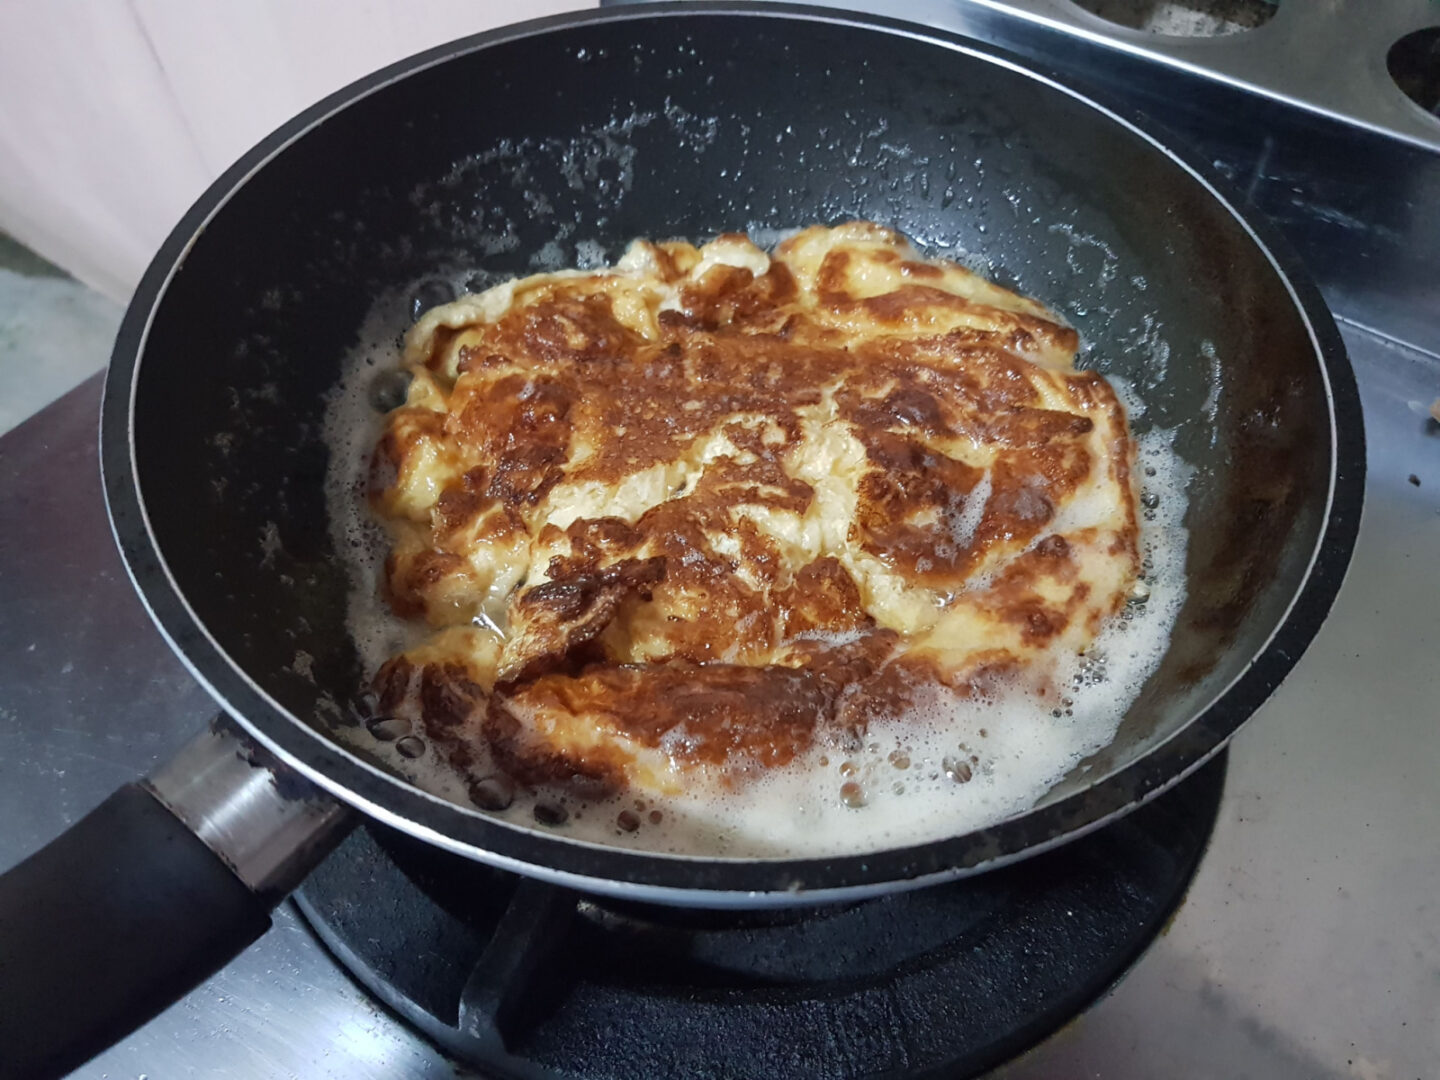 overcooking an omelette